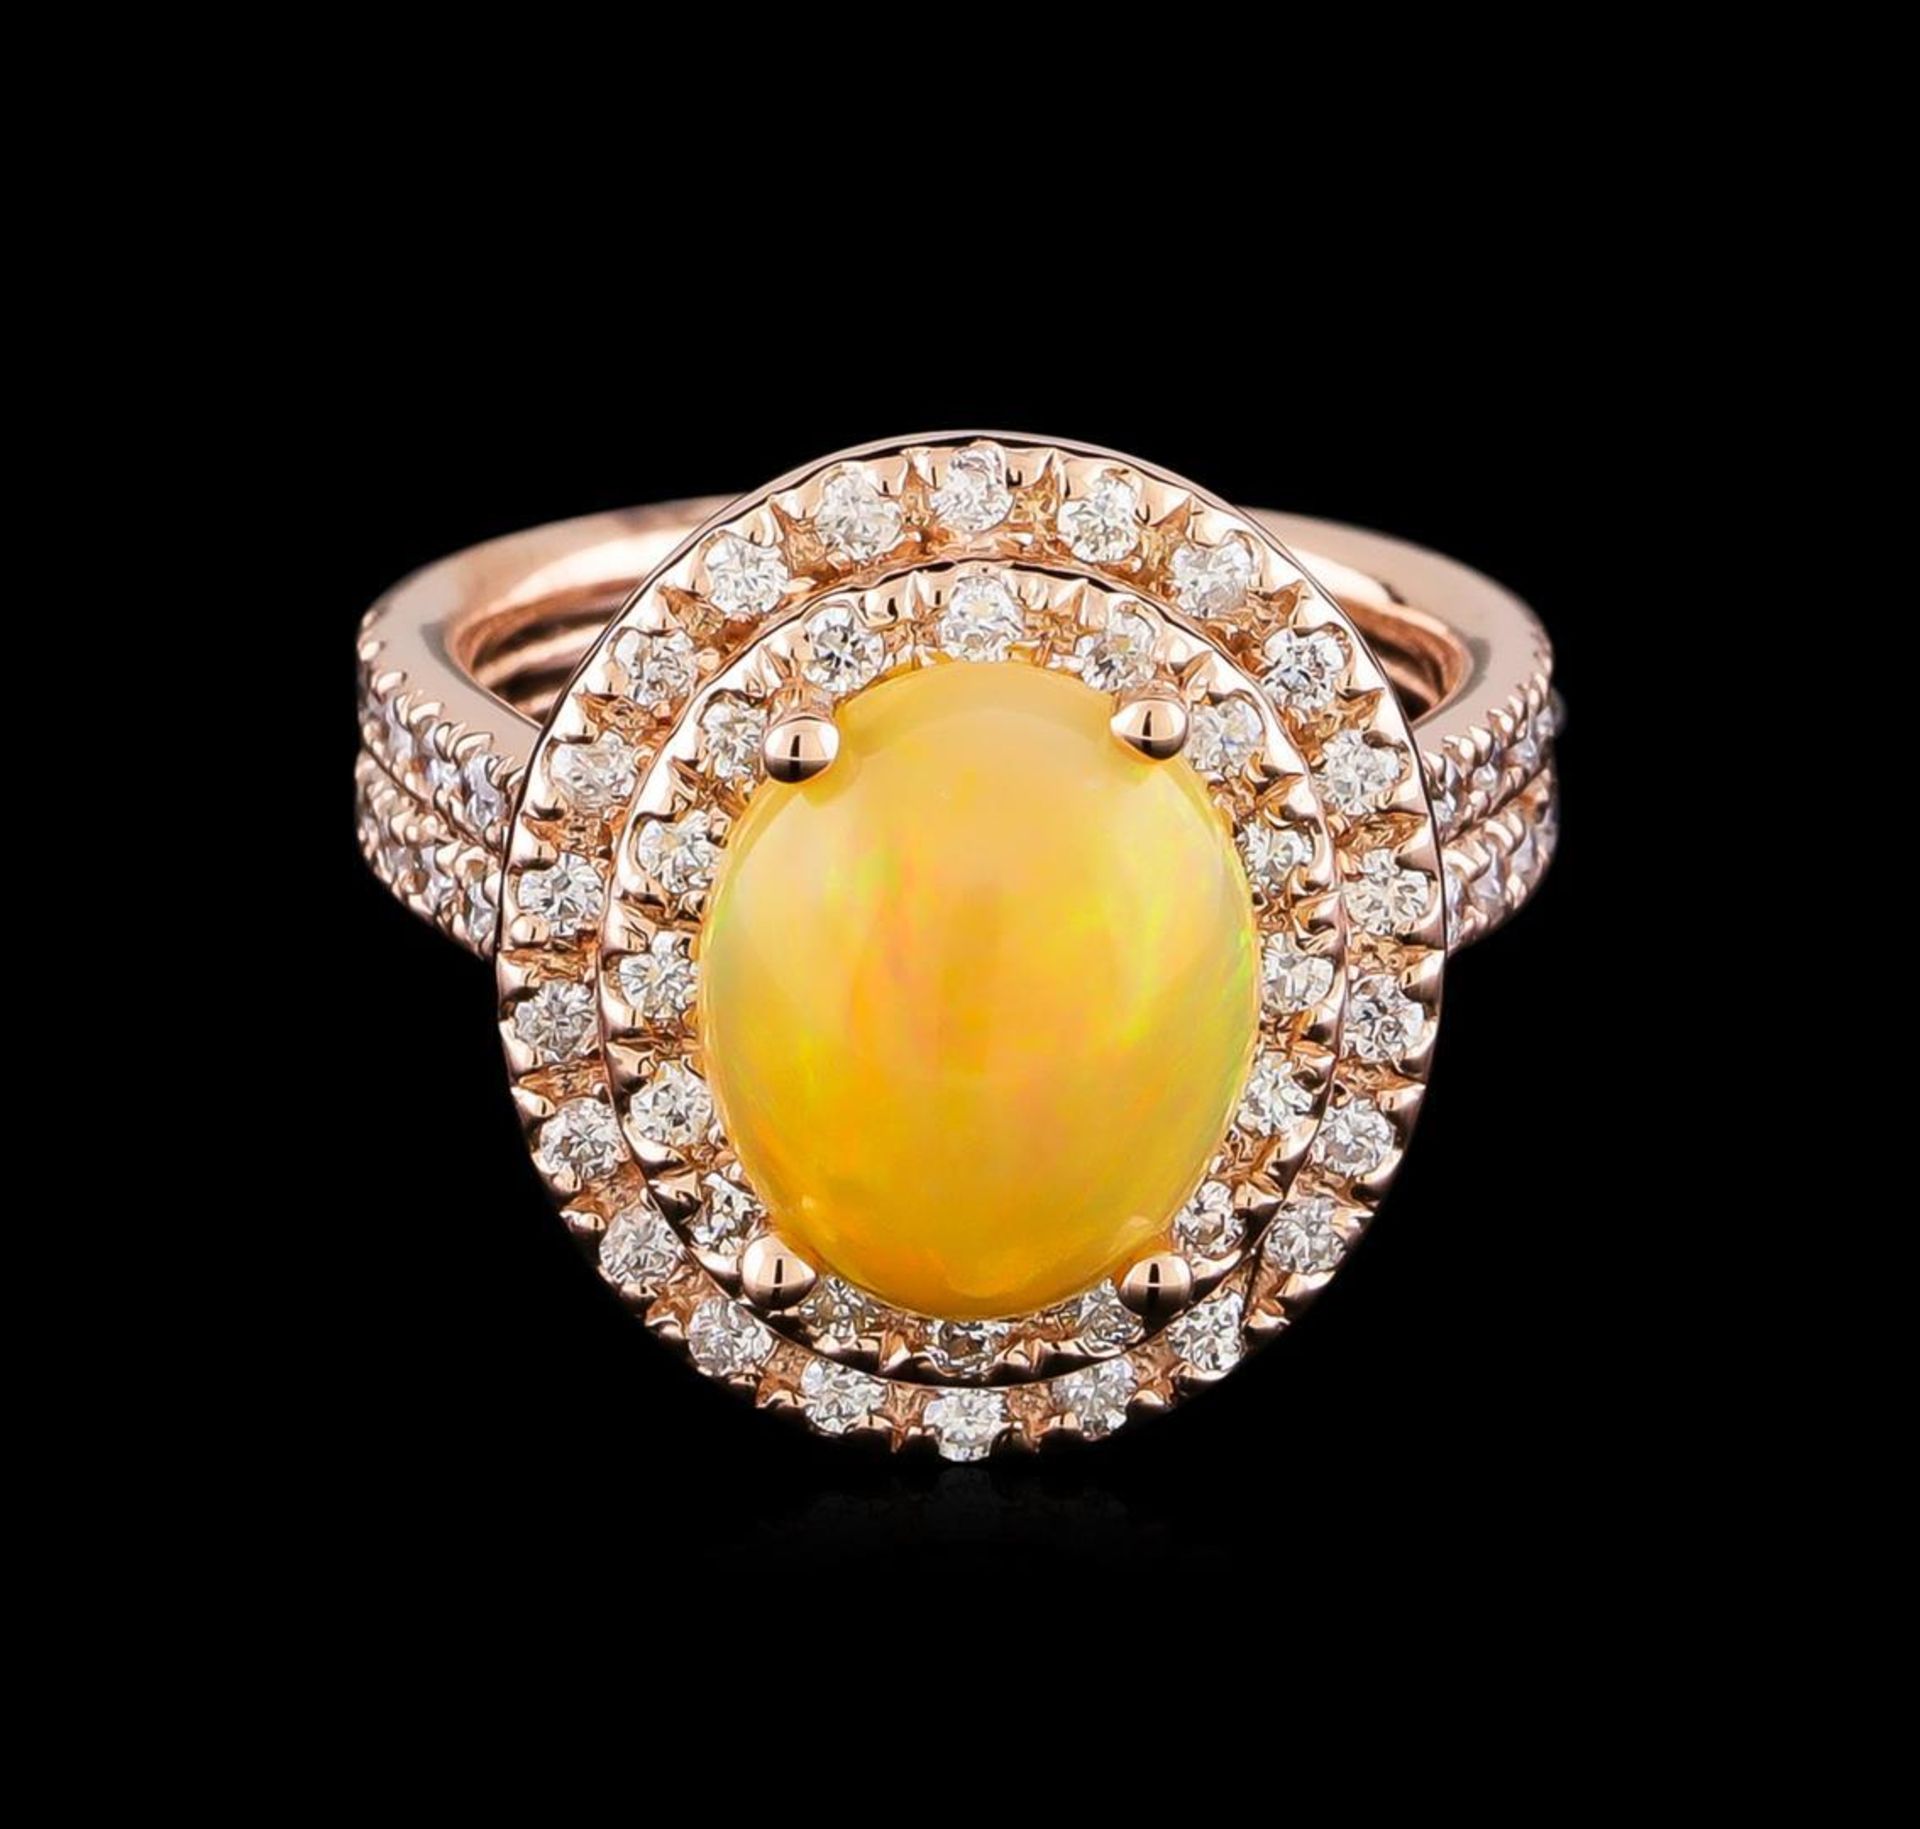 2.40 ctw Opal and Diamond Ring - 14KT Rose Gold - Image 2 of 5